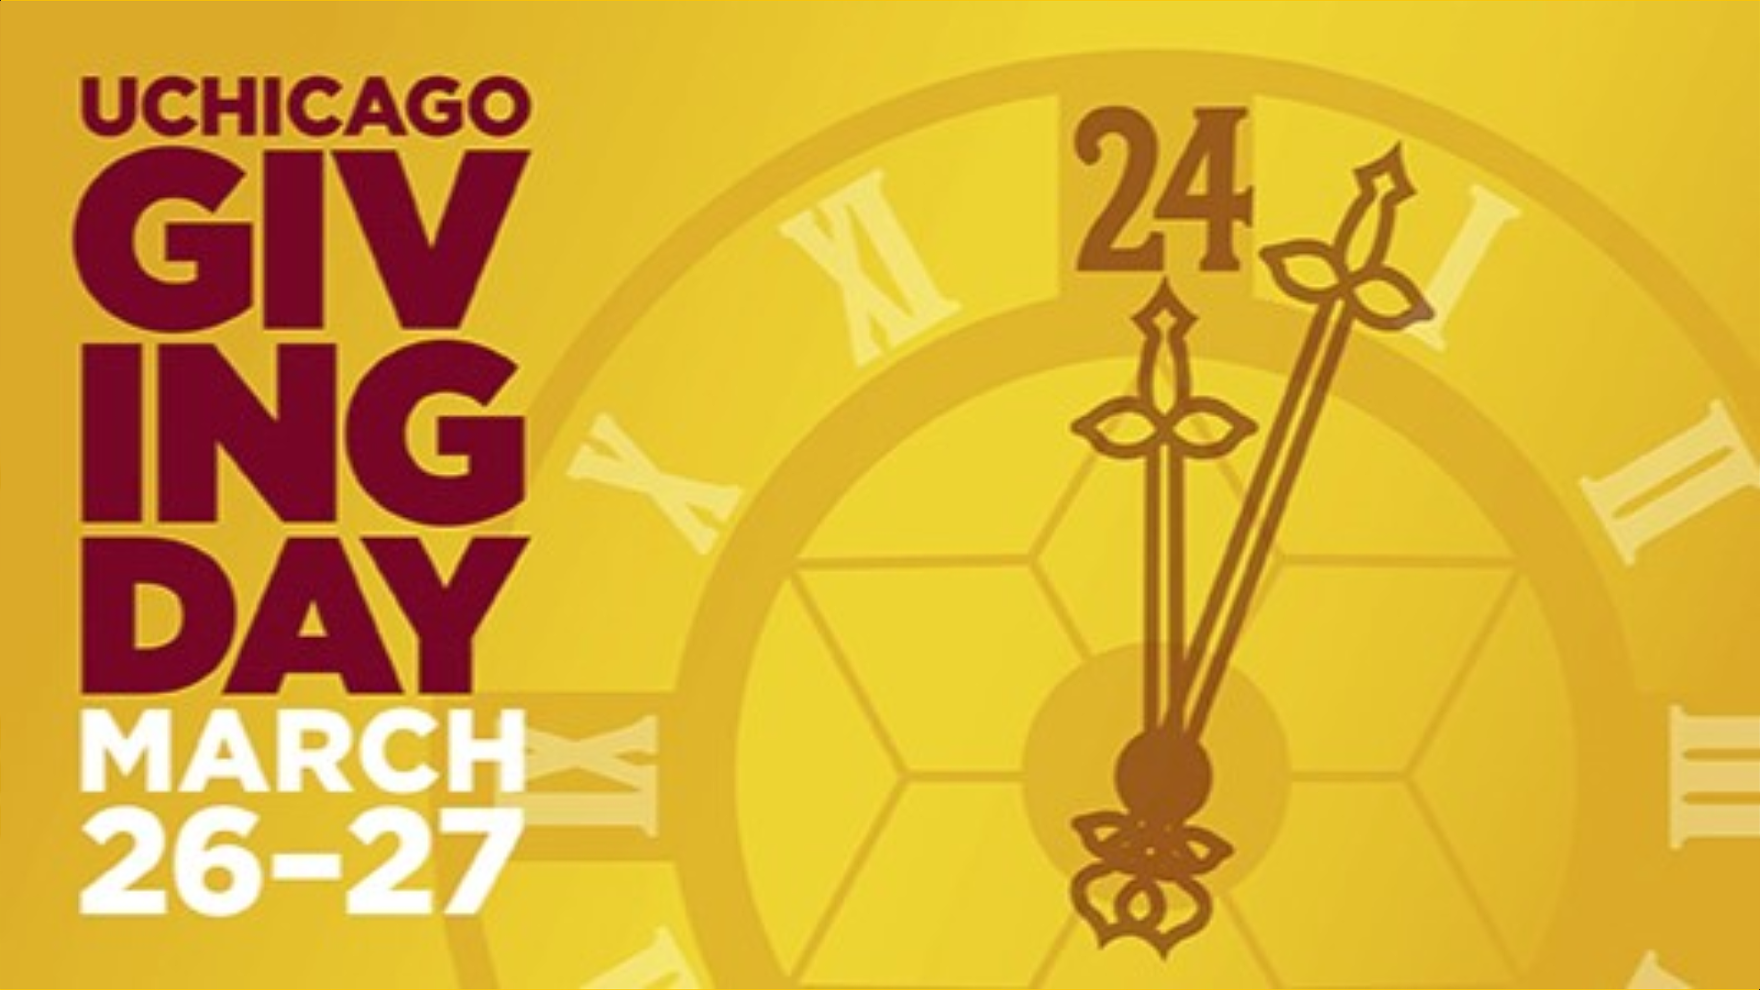 Giving Day March 26-27